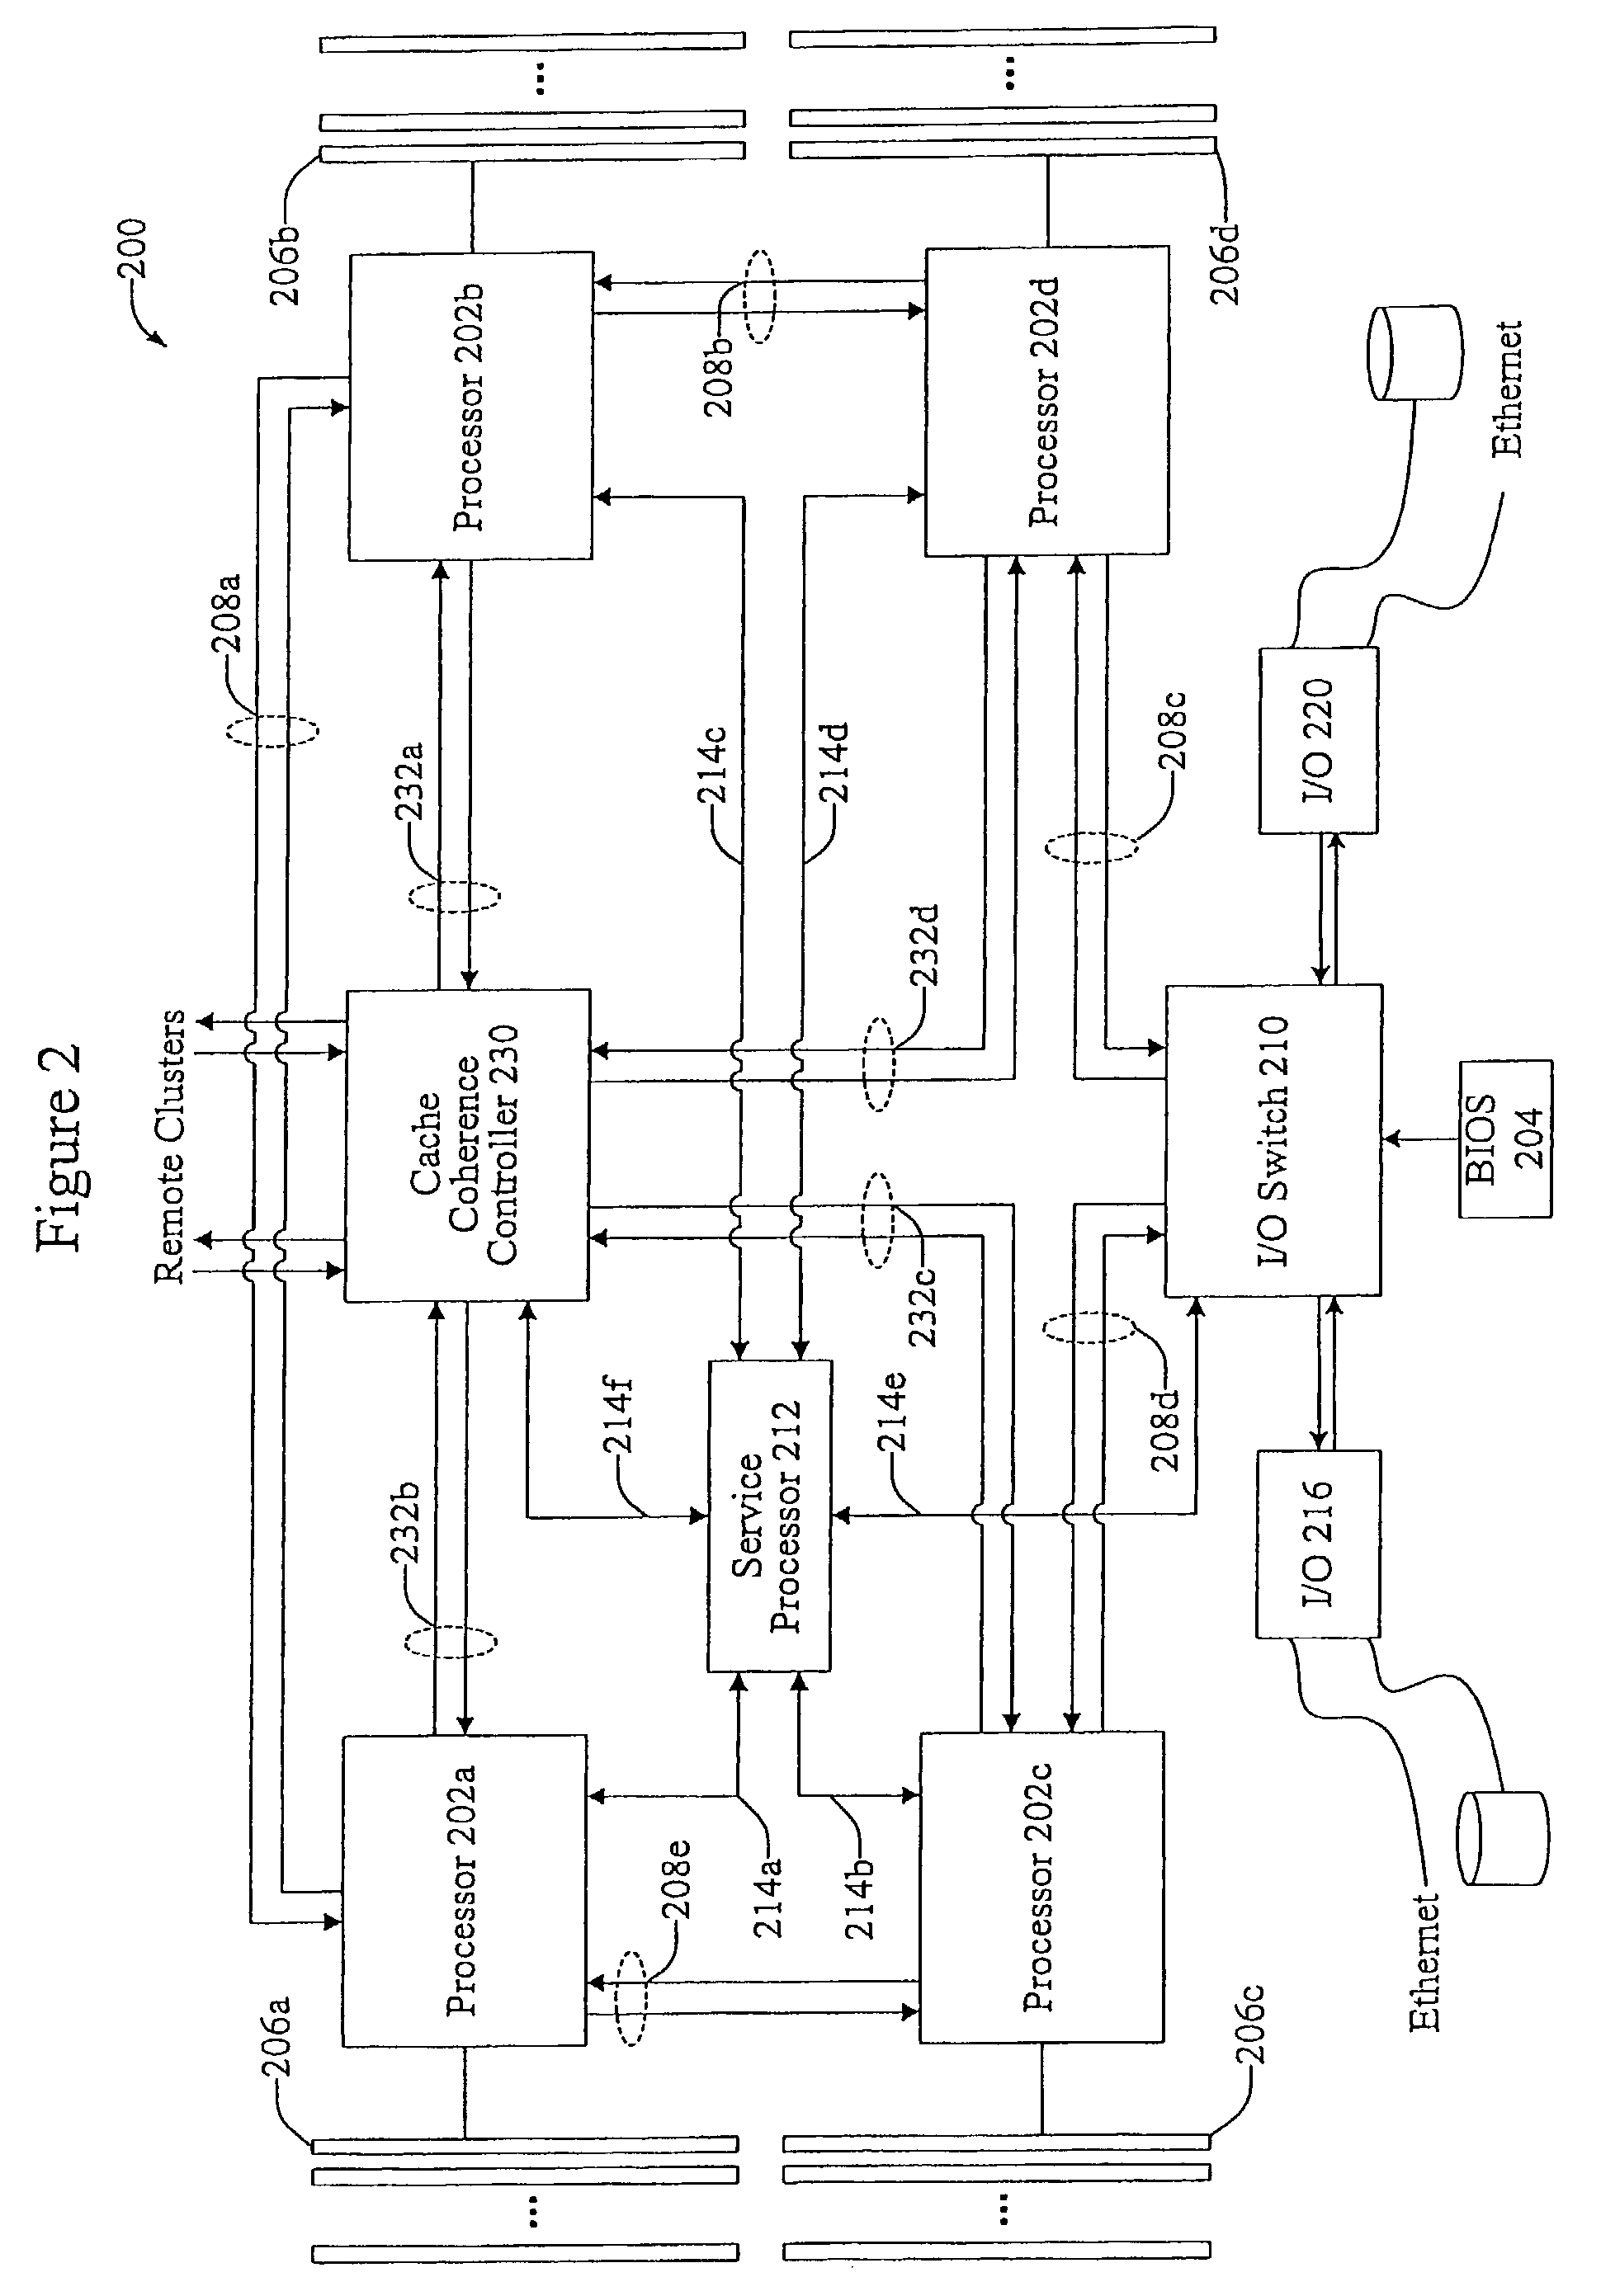 Methods and apparatus for multiple cluster locking